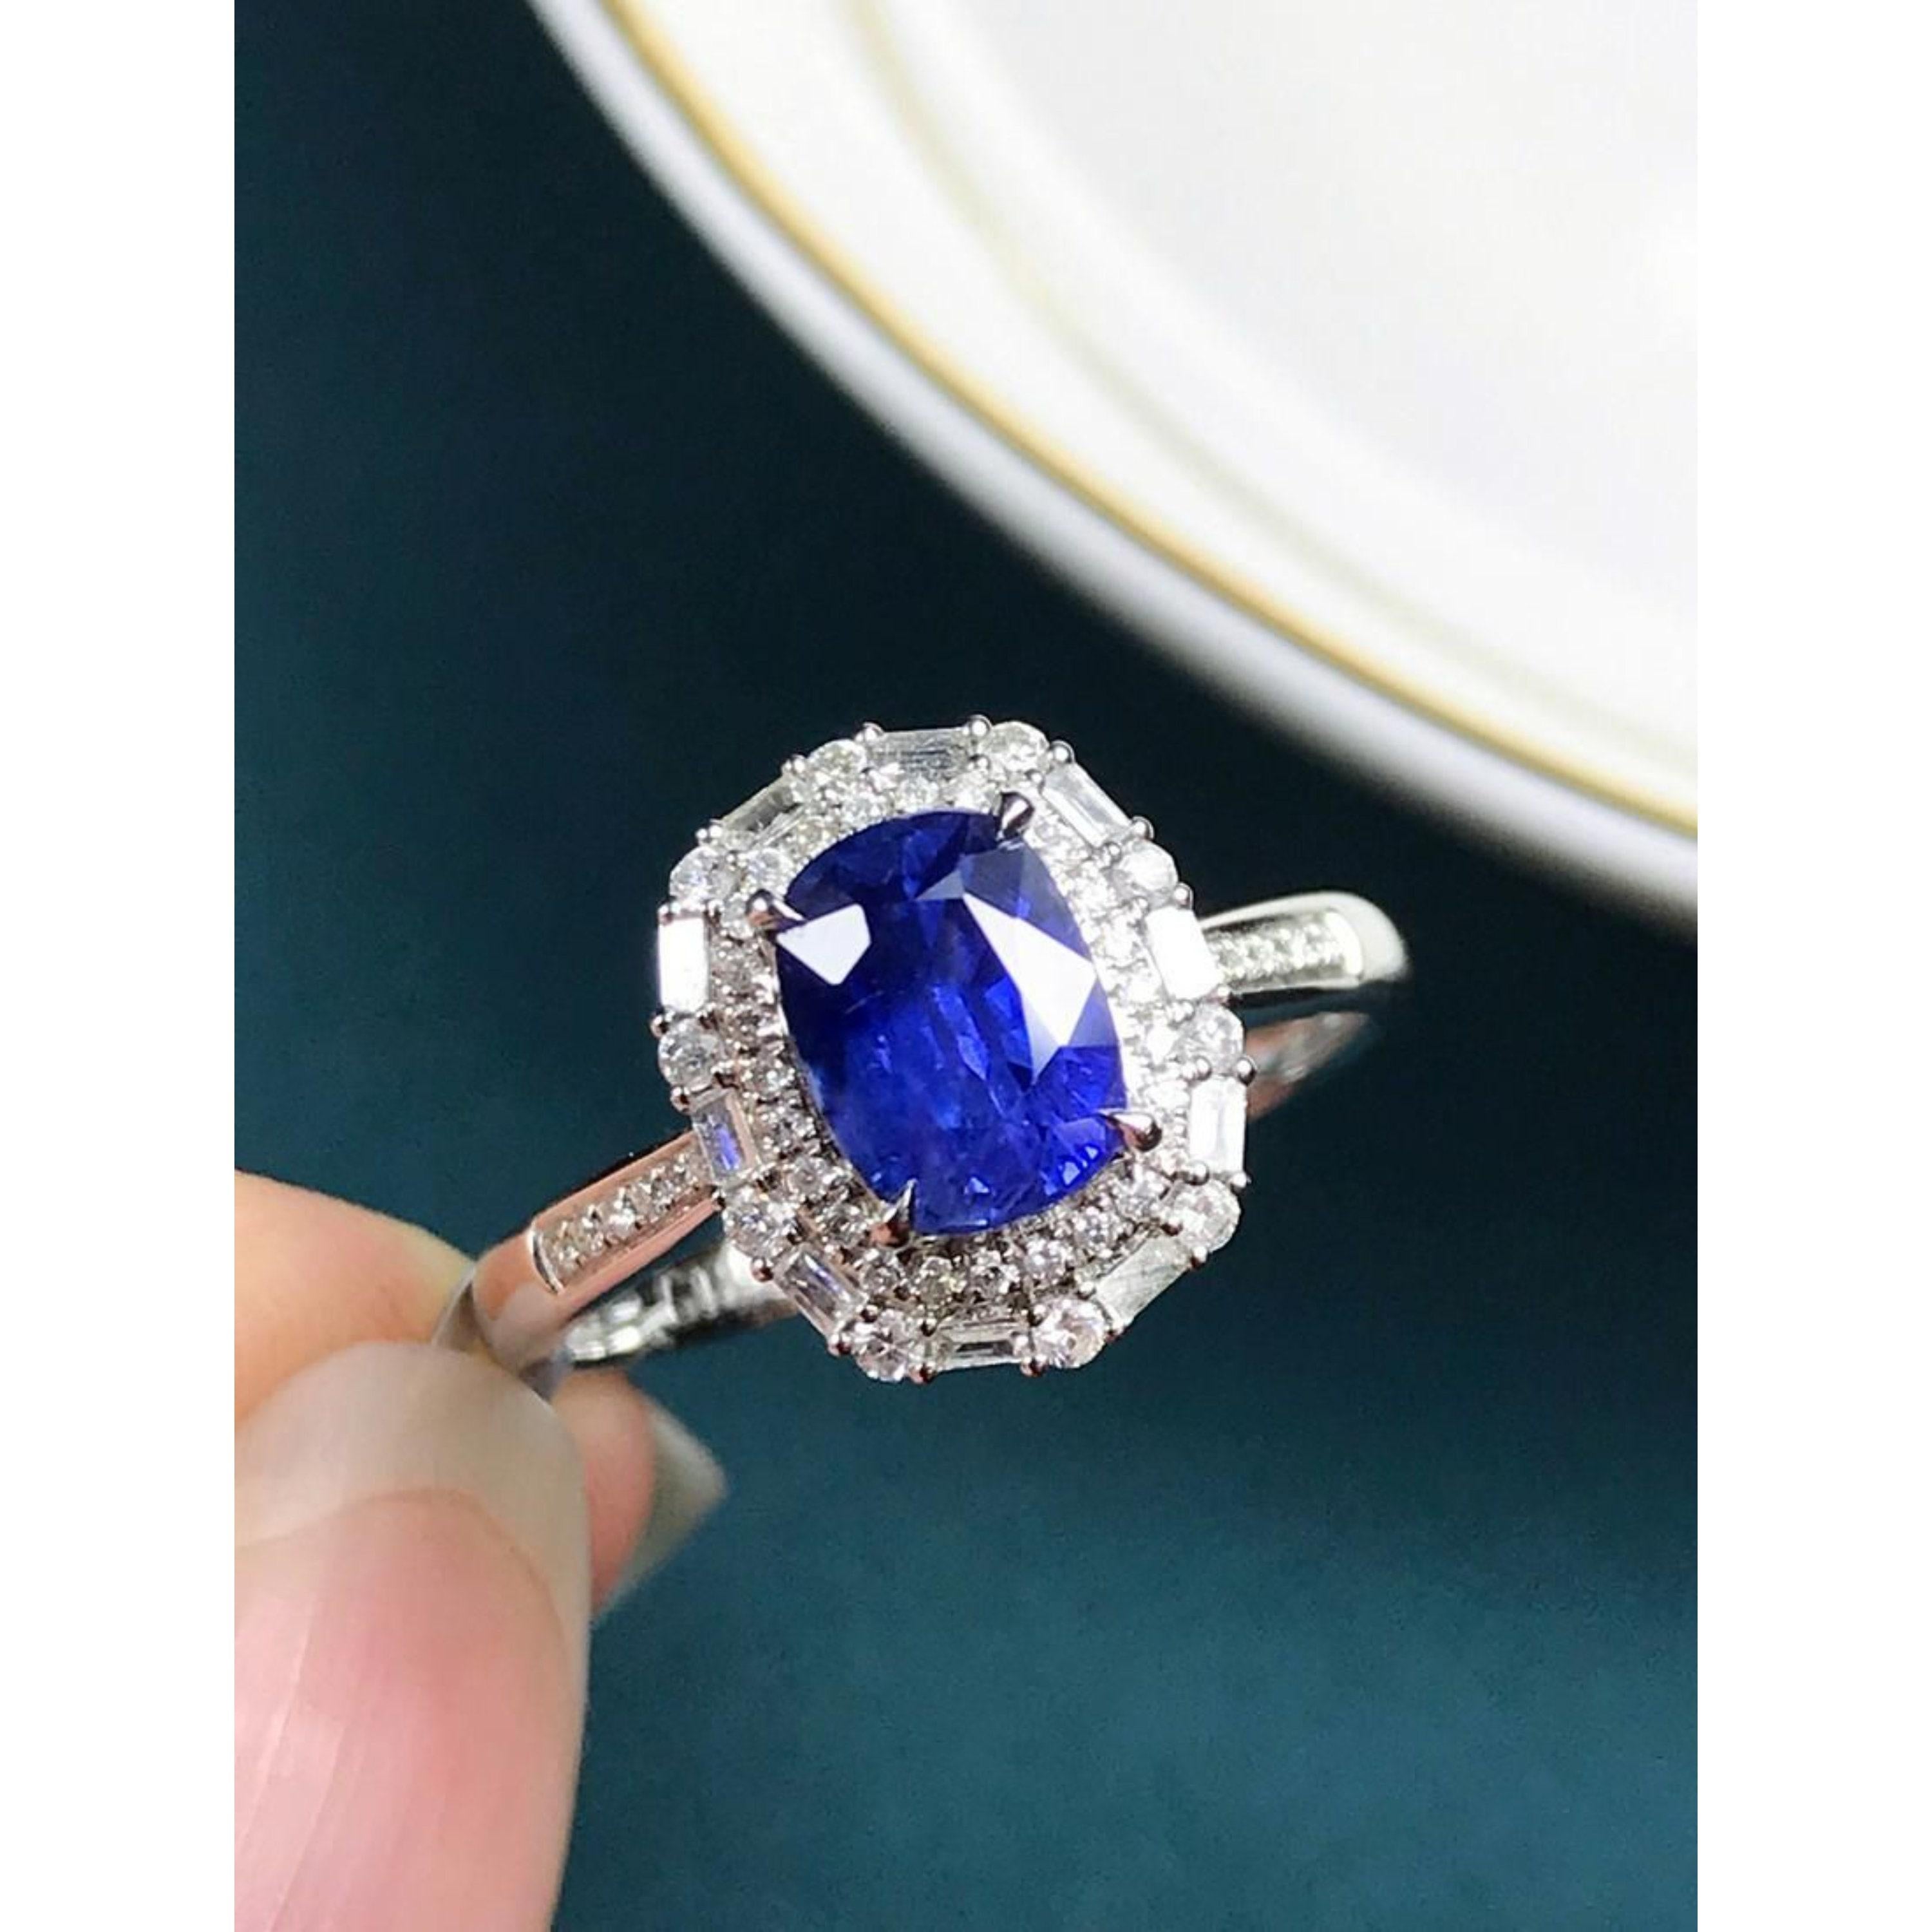 For Sale:  Natural Cushion Cut Sapphire Engagement Ring, Diamond Wedding Ring 4